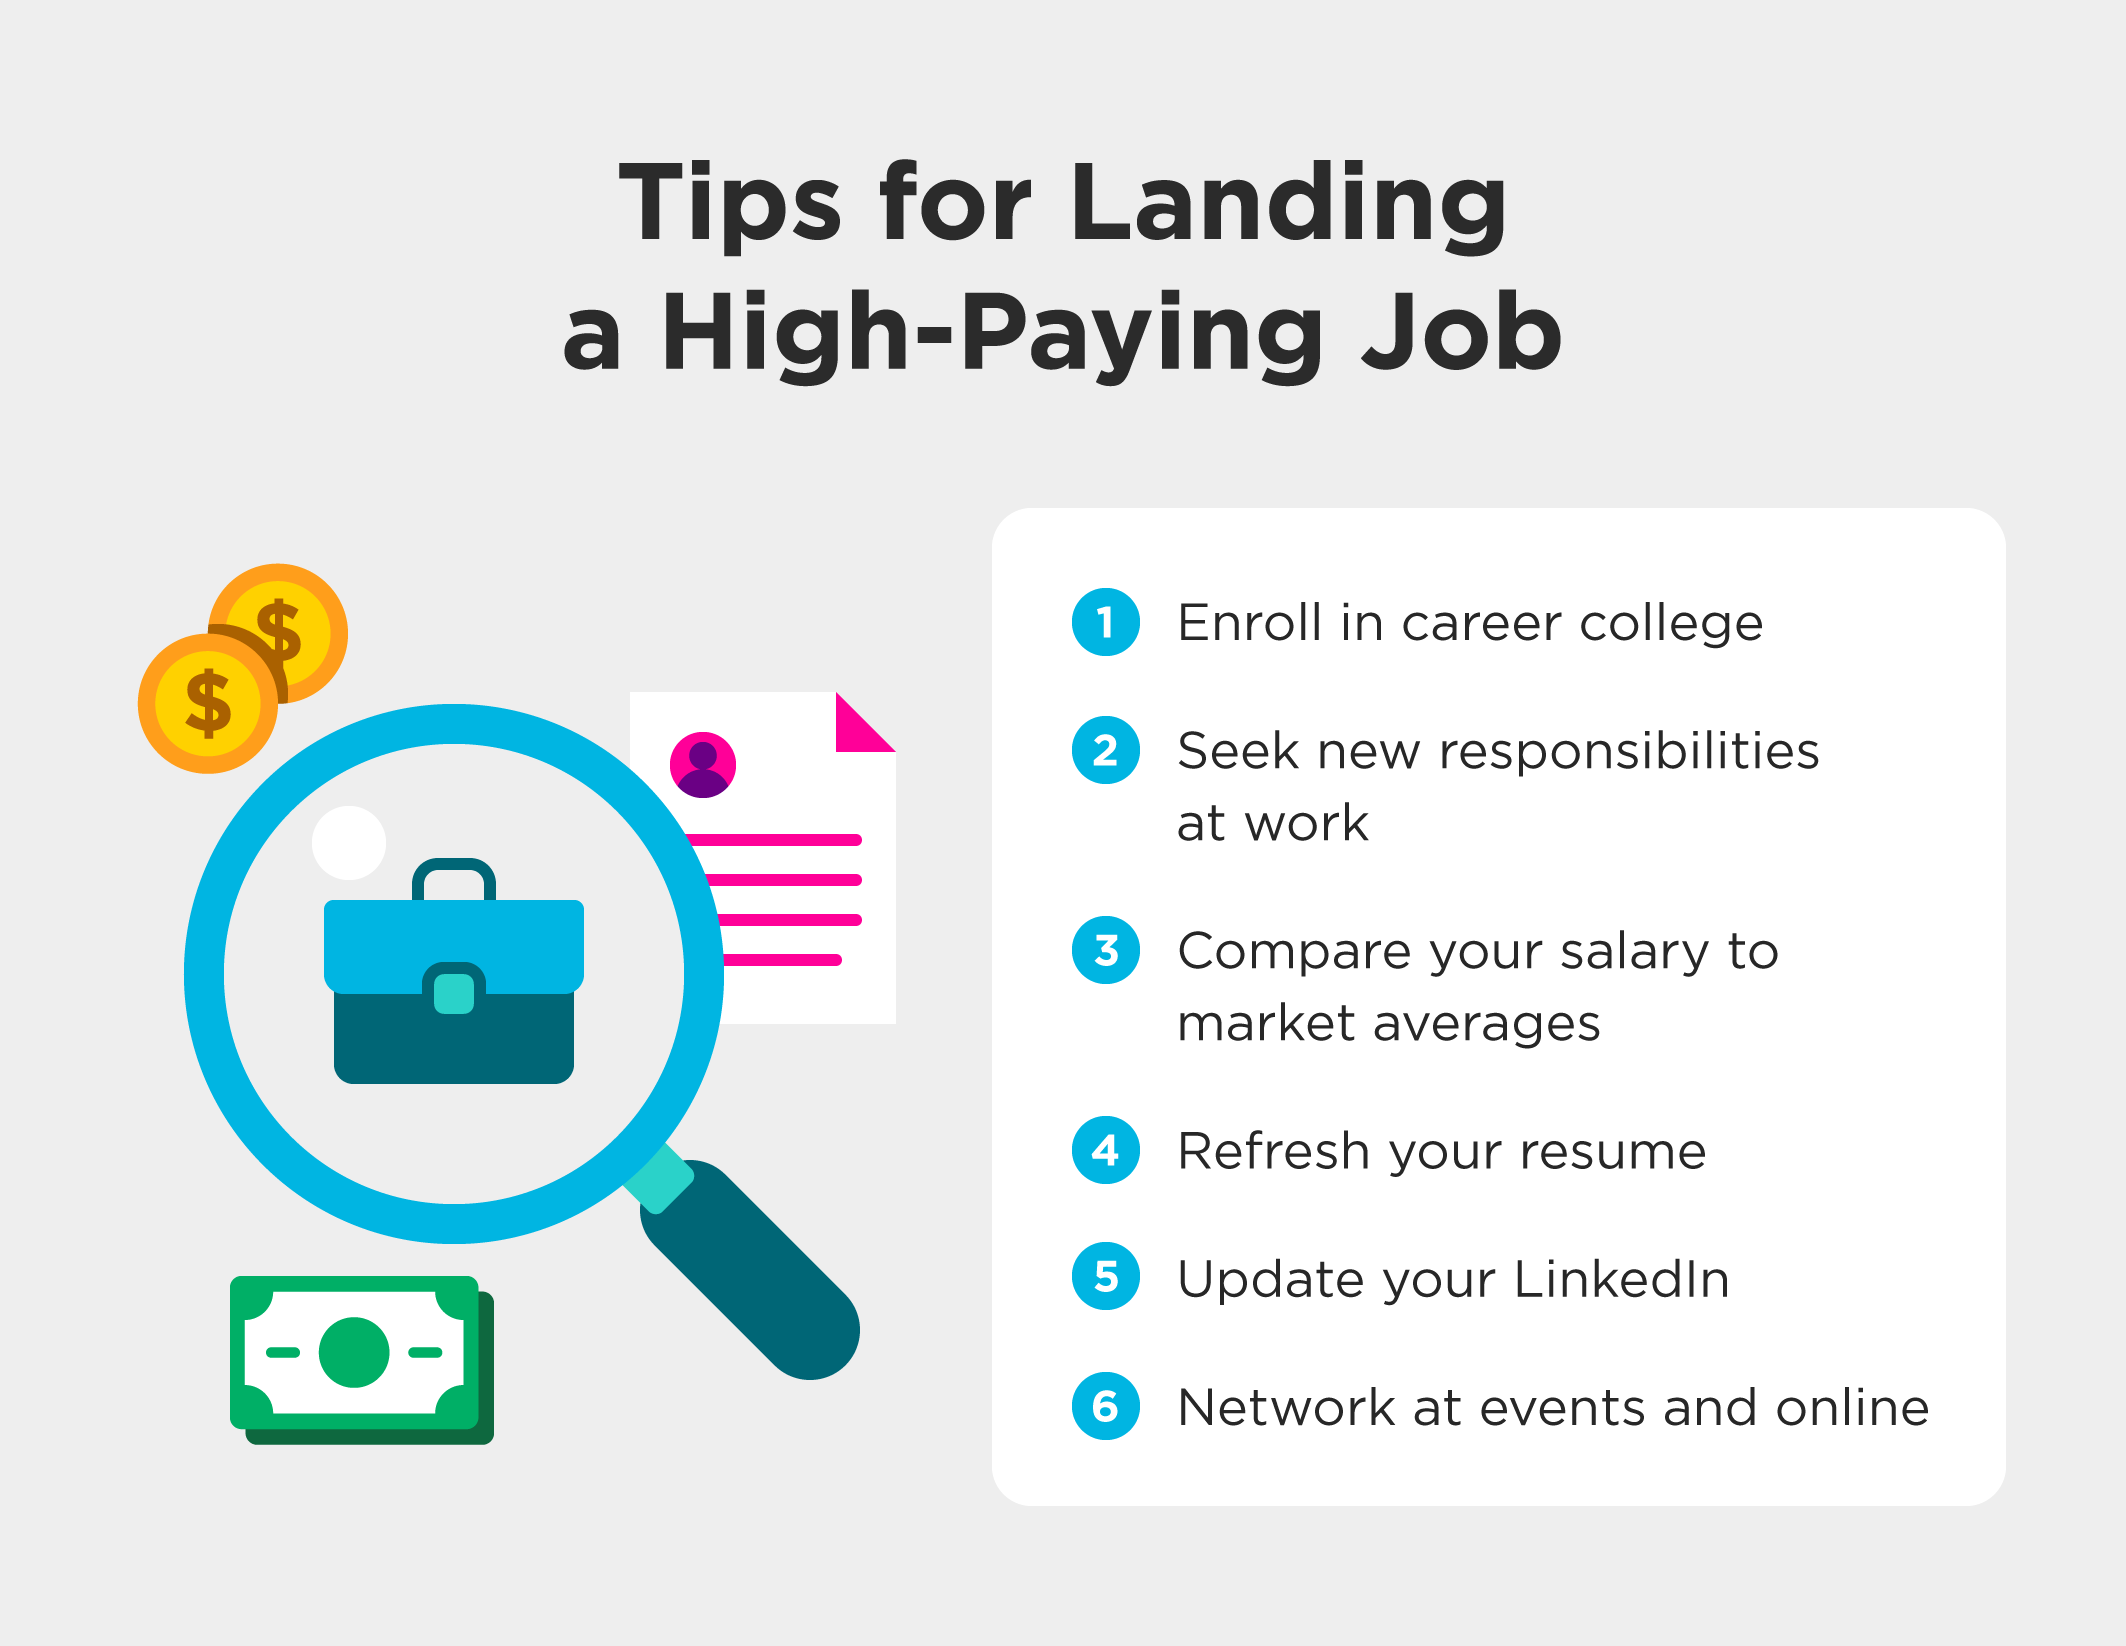 A list of six tips for securing a high-paying job in Canada paired with illustrated icons to represent a job hunt.